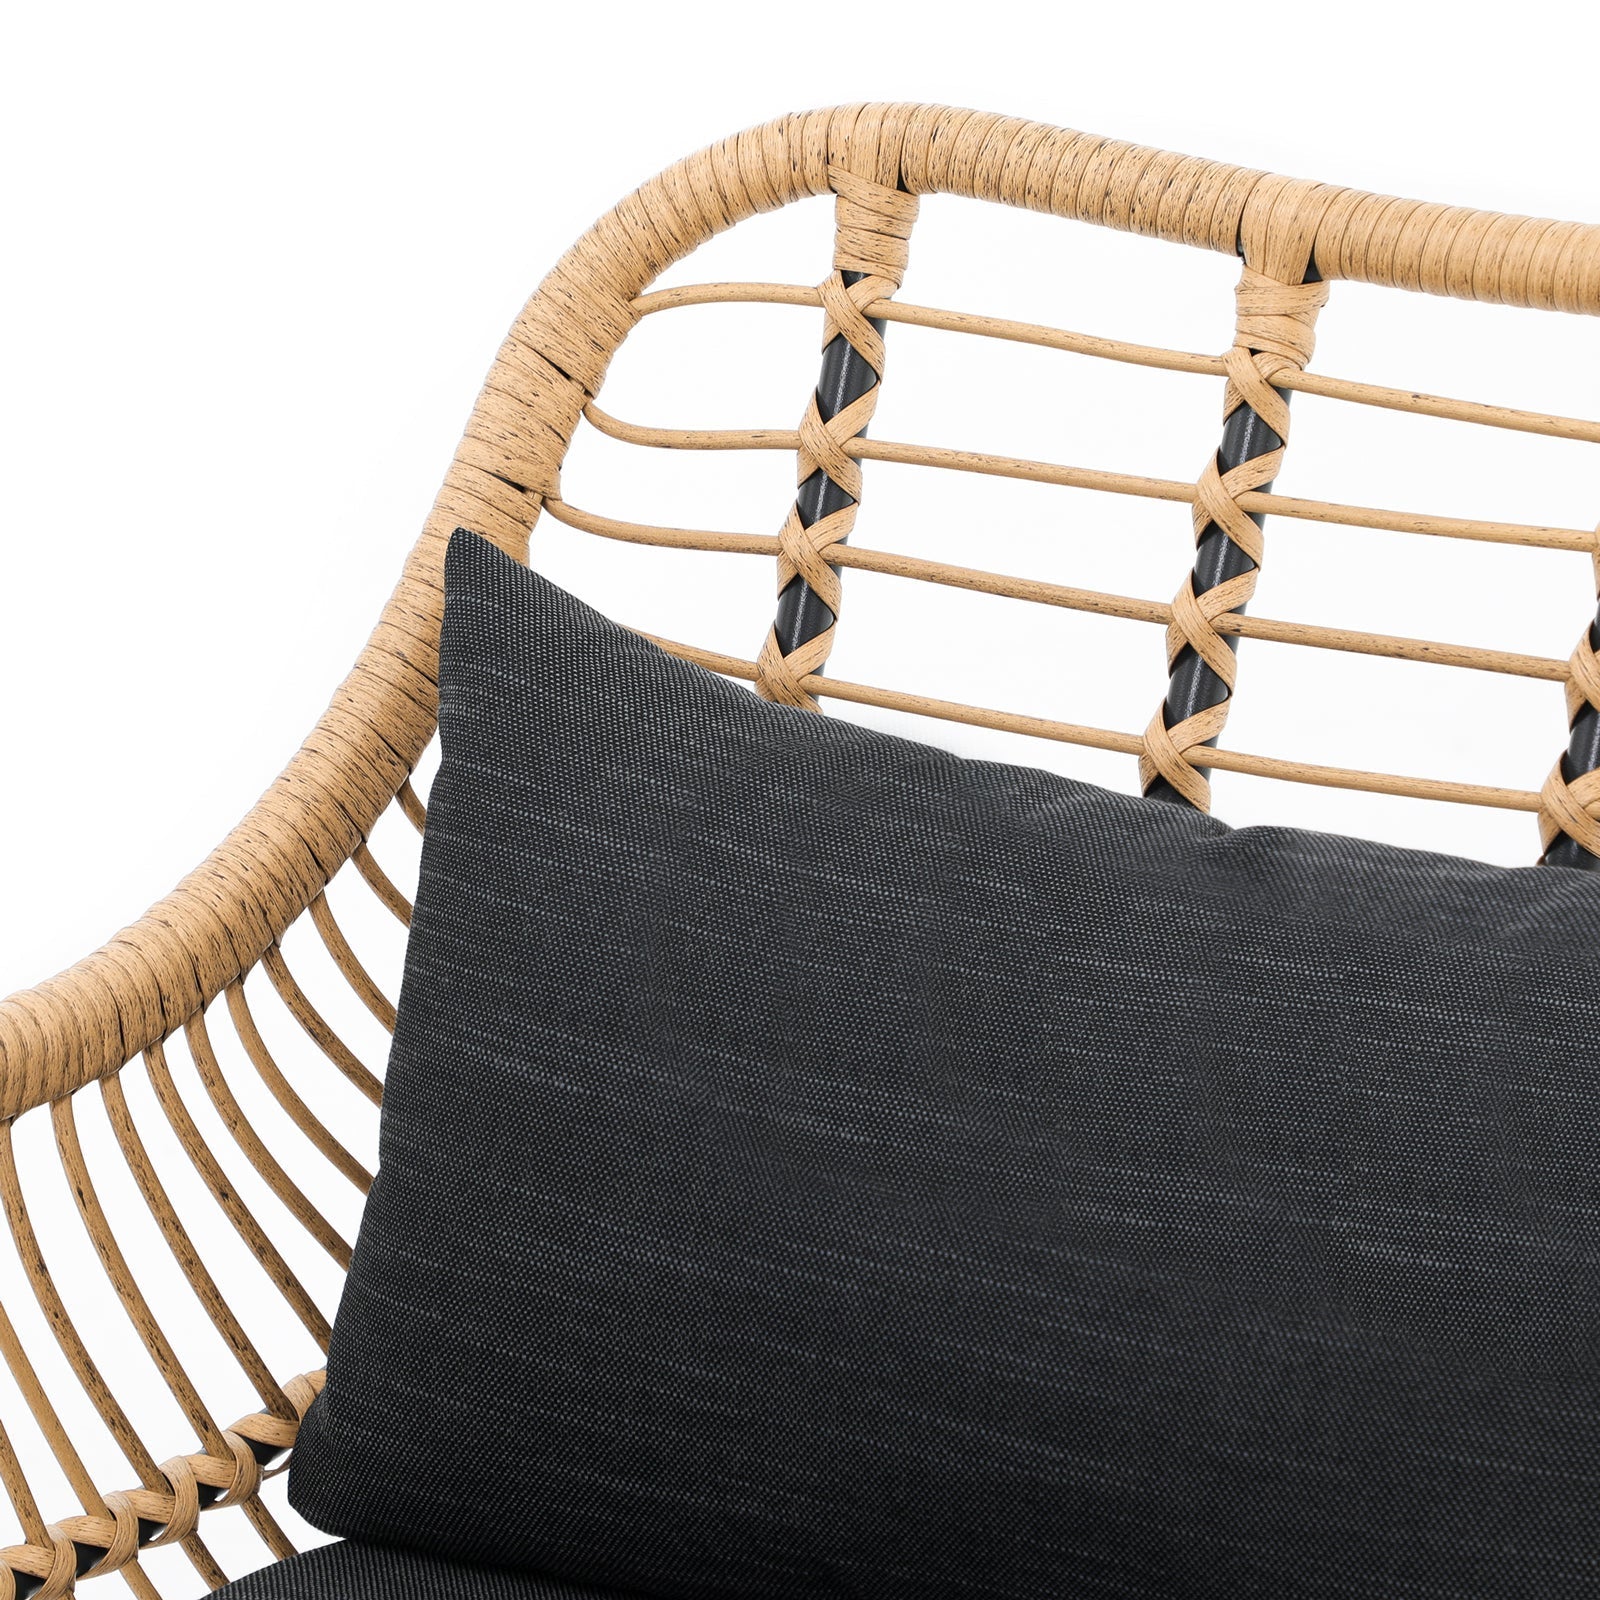 Oia Natural Wicker Chair, Boho Style Wicker, Black Cushion, Hand-woven Wicker Detailed Information-Jardina Furniture - 2#Color_Black